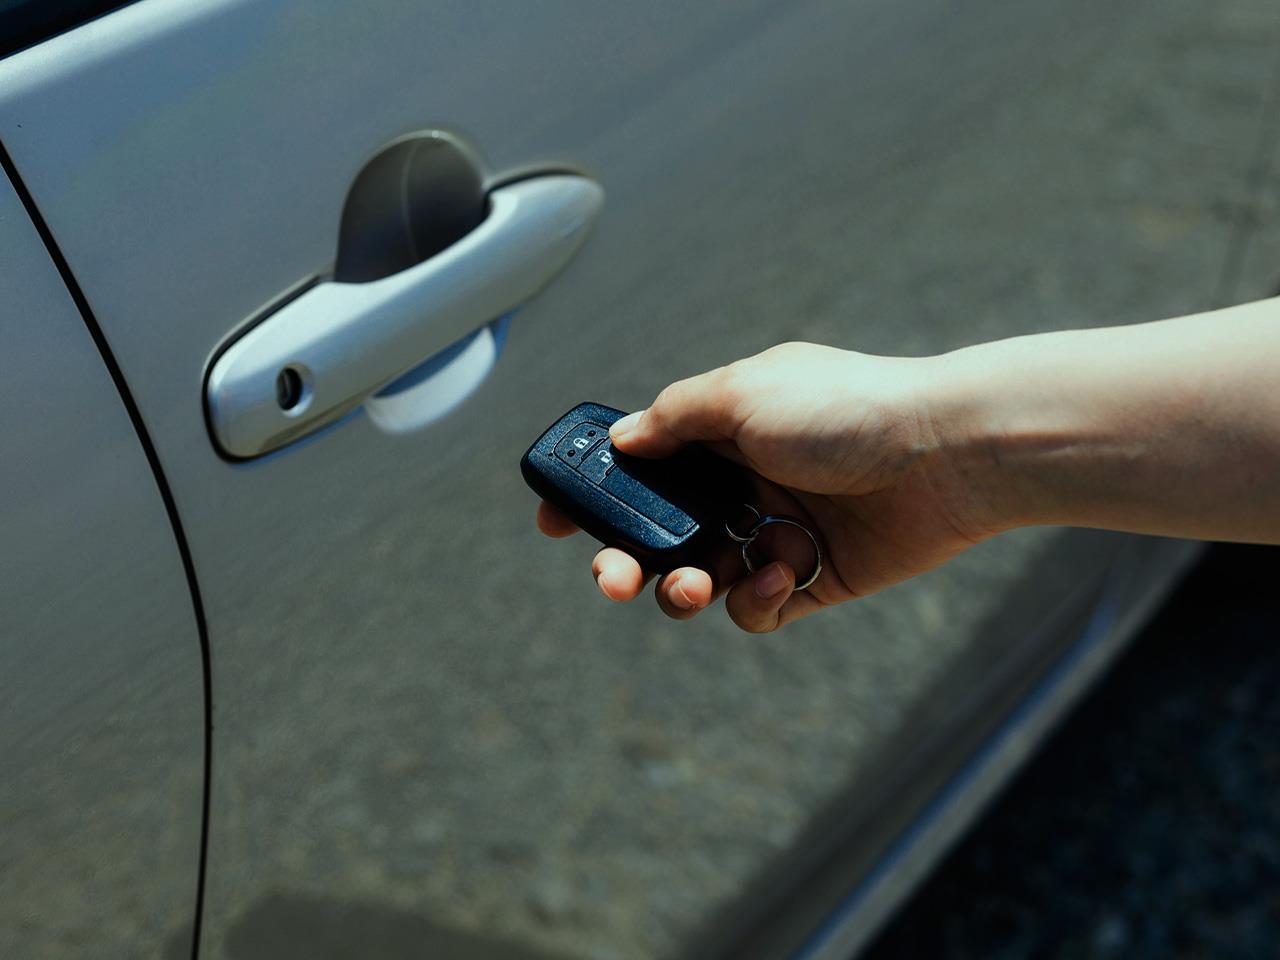 Keyless Entry System for Cars